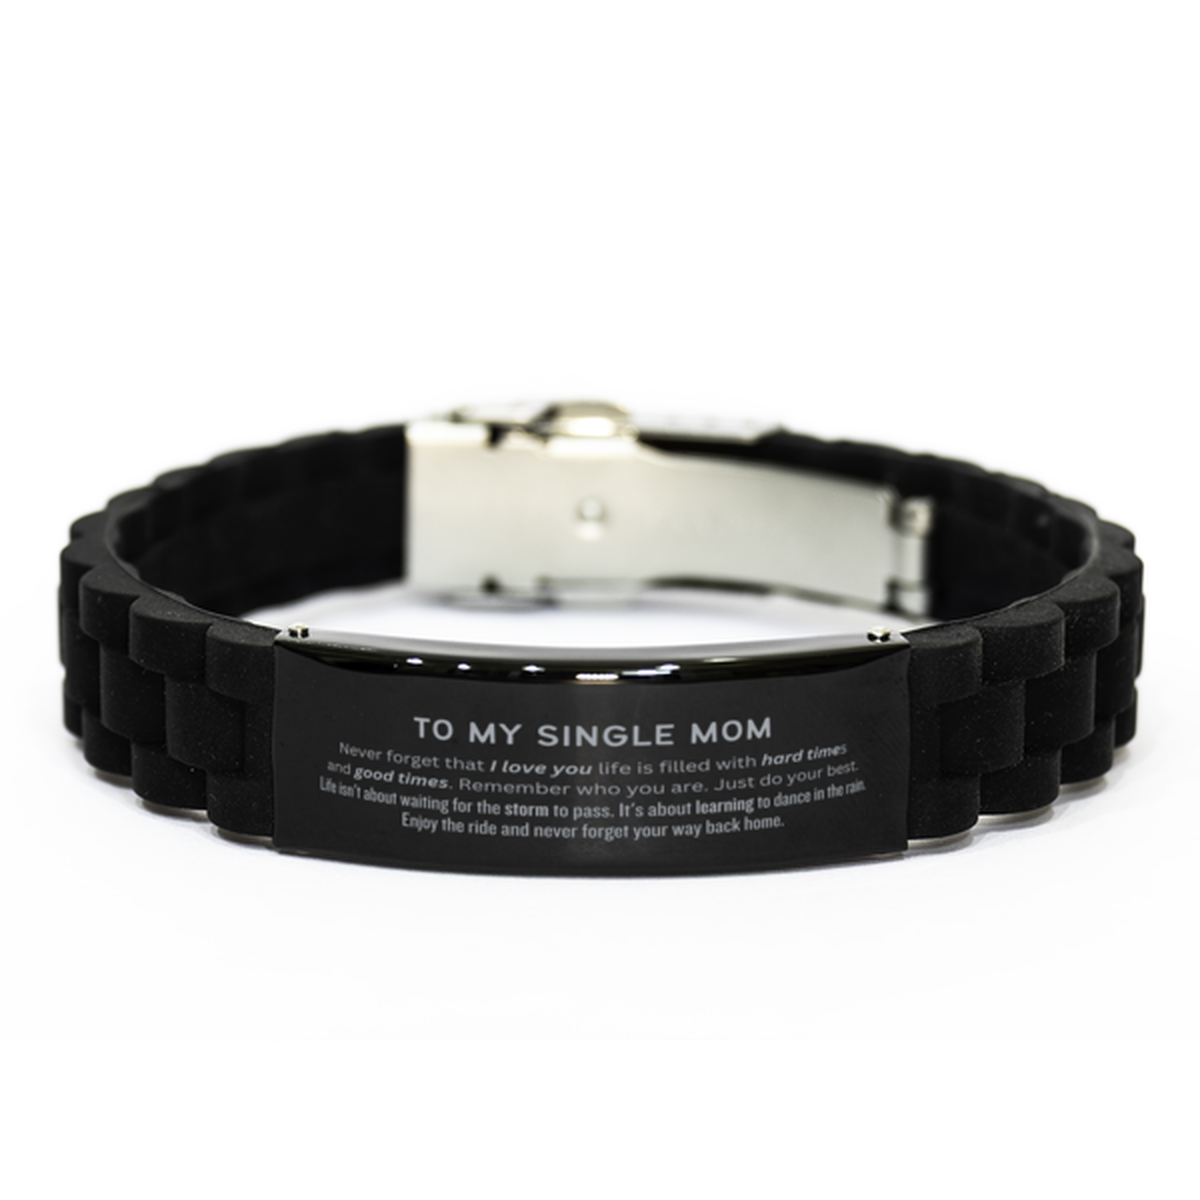 Christmas Single Mom Black Glidelock Clasp Bracelet Gifts, To My Single Mom Birthday Thank You Gifts For Single Mom, Graduation Unique Gifts For Single Mom To My Single Mom Never forget that I love you life is filled with hard times and good times. Rememb